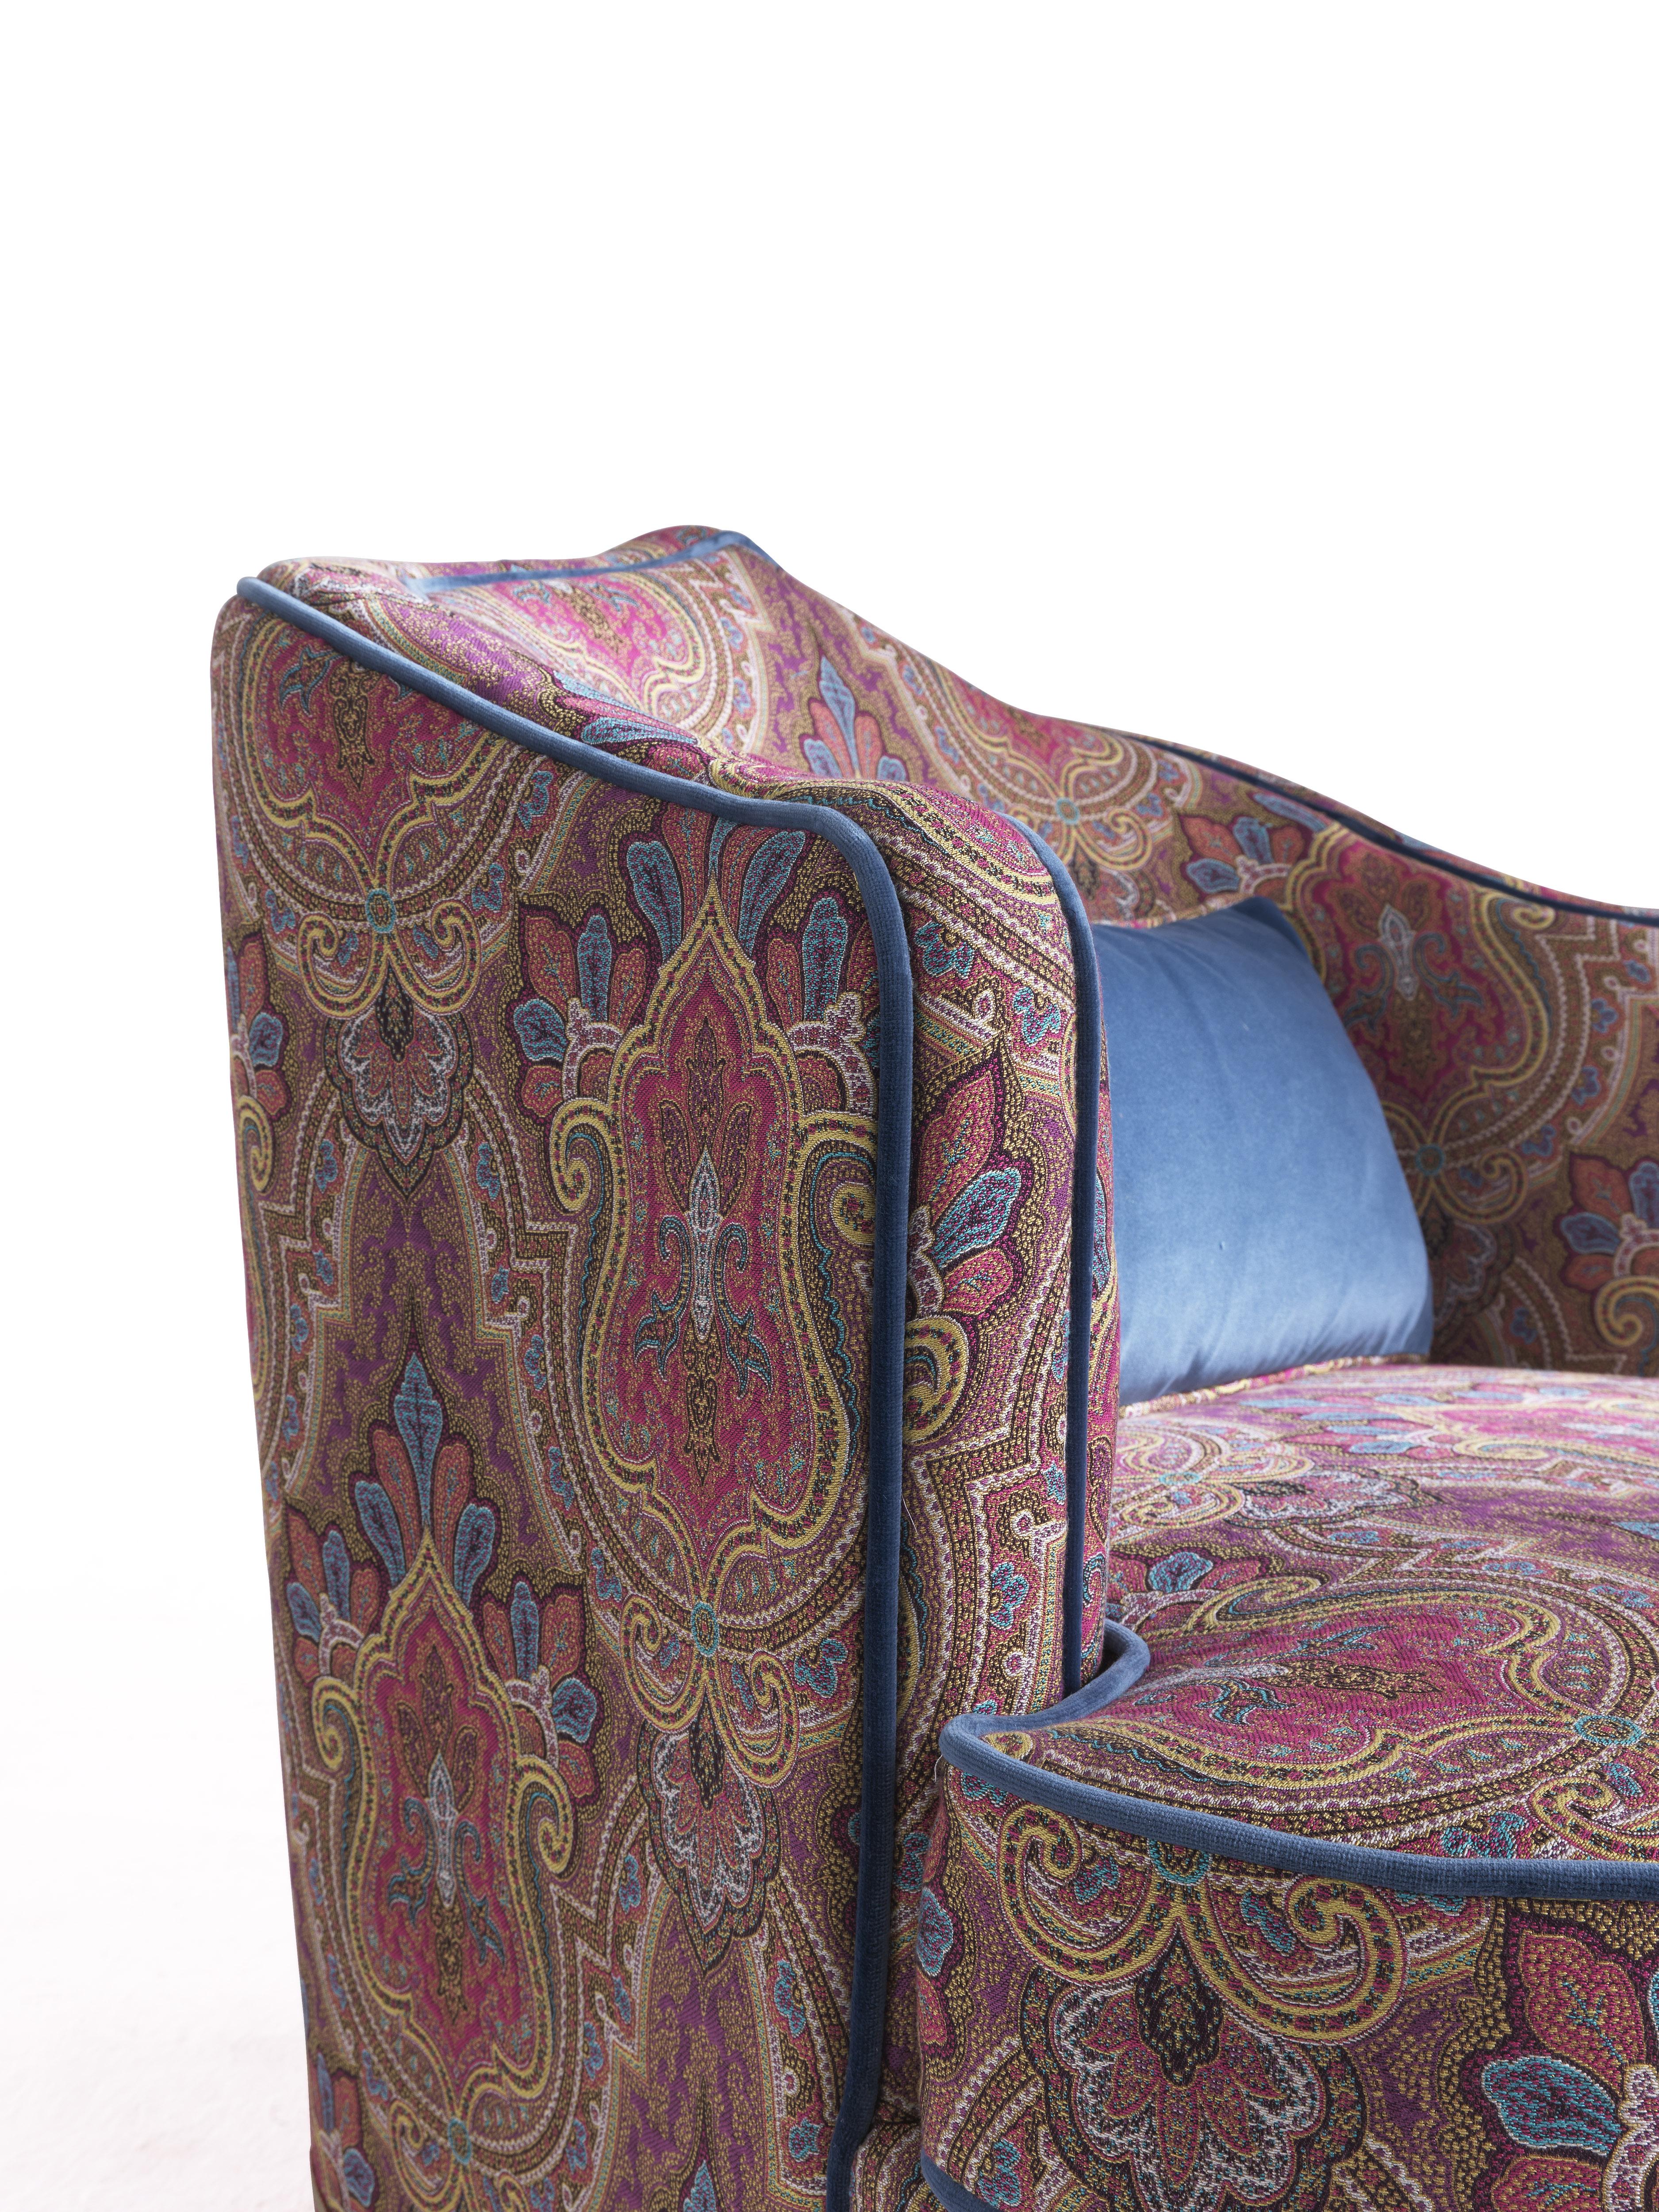 Modern 21st Century Amina Small Armchair in Fabric by Etro Home Interiors For Sale